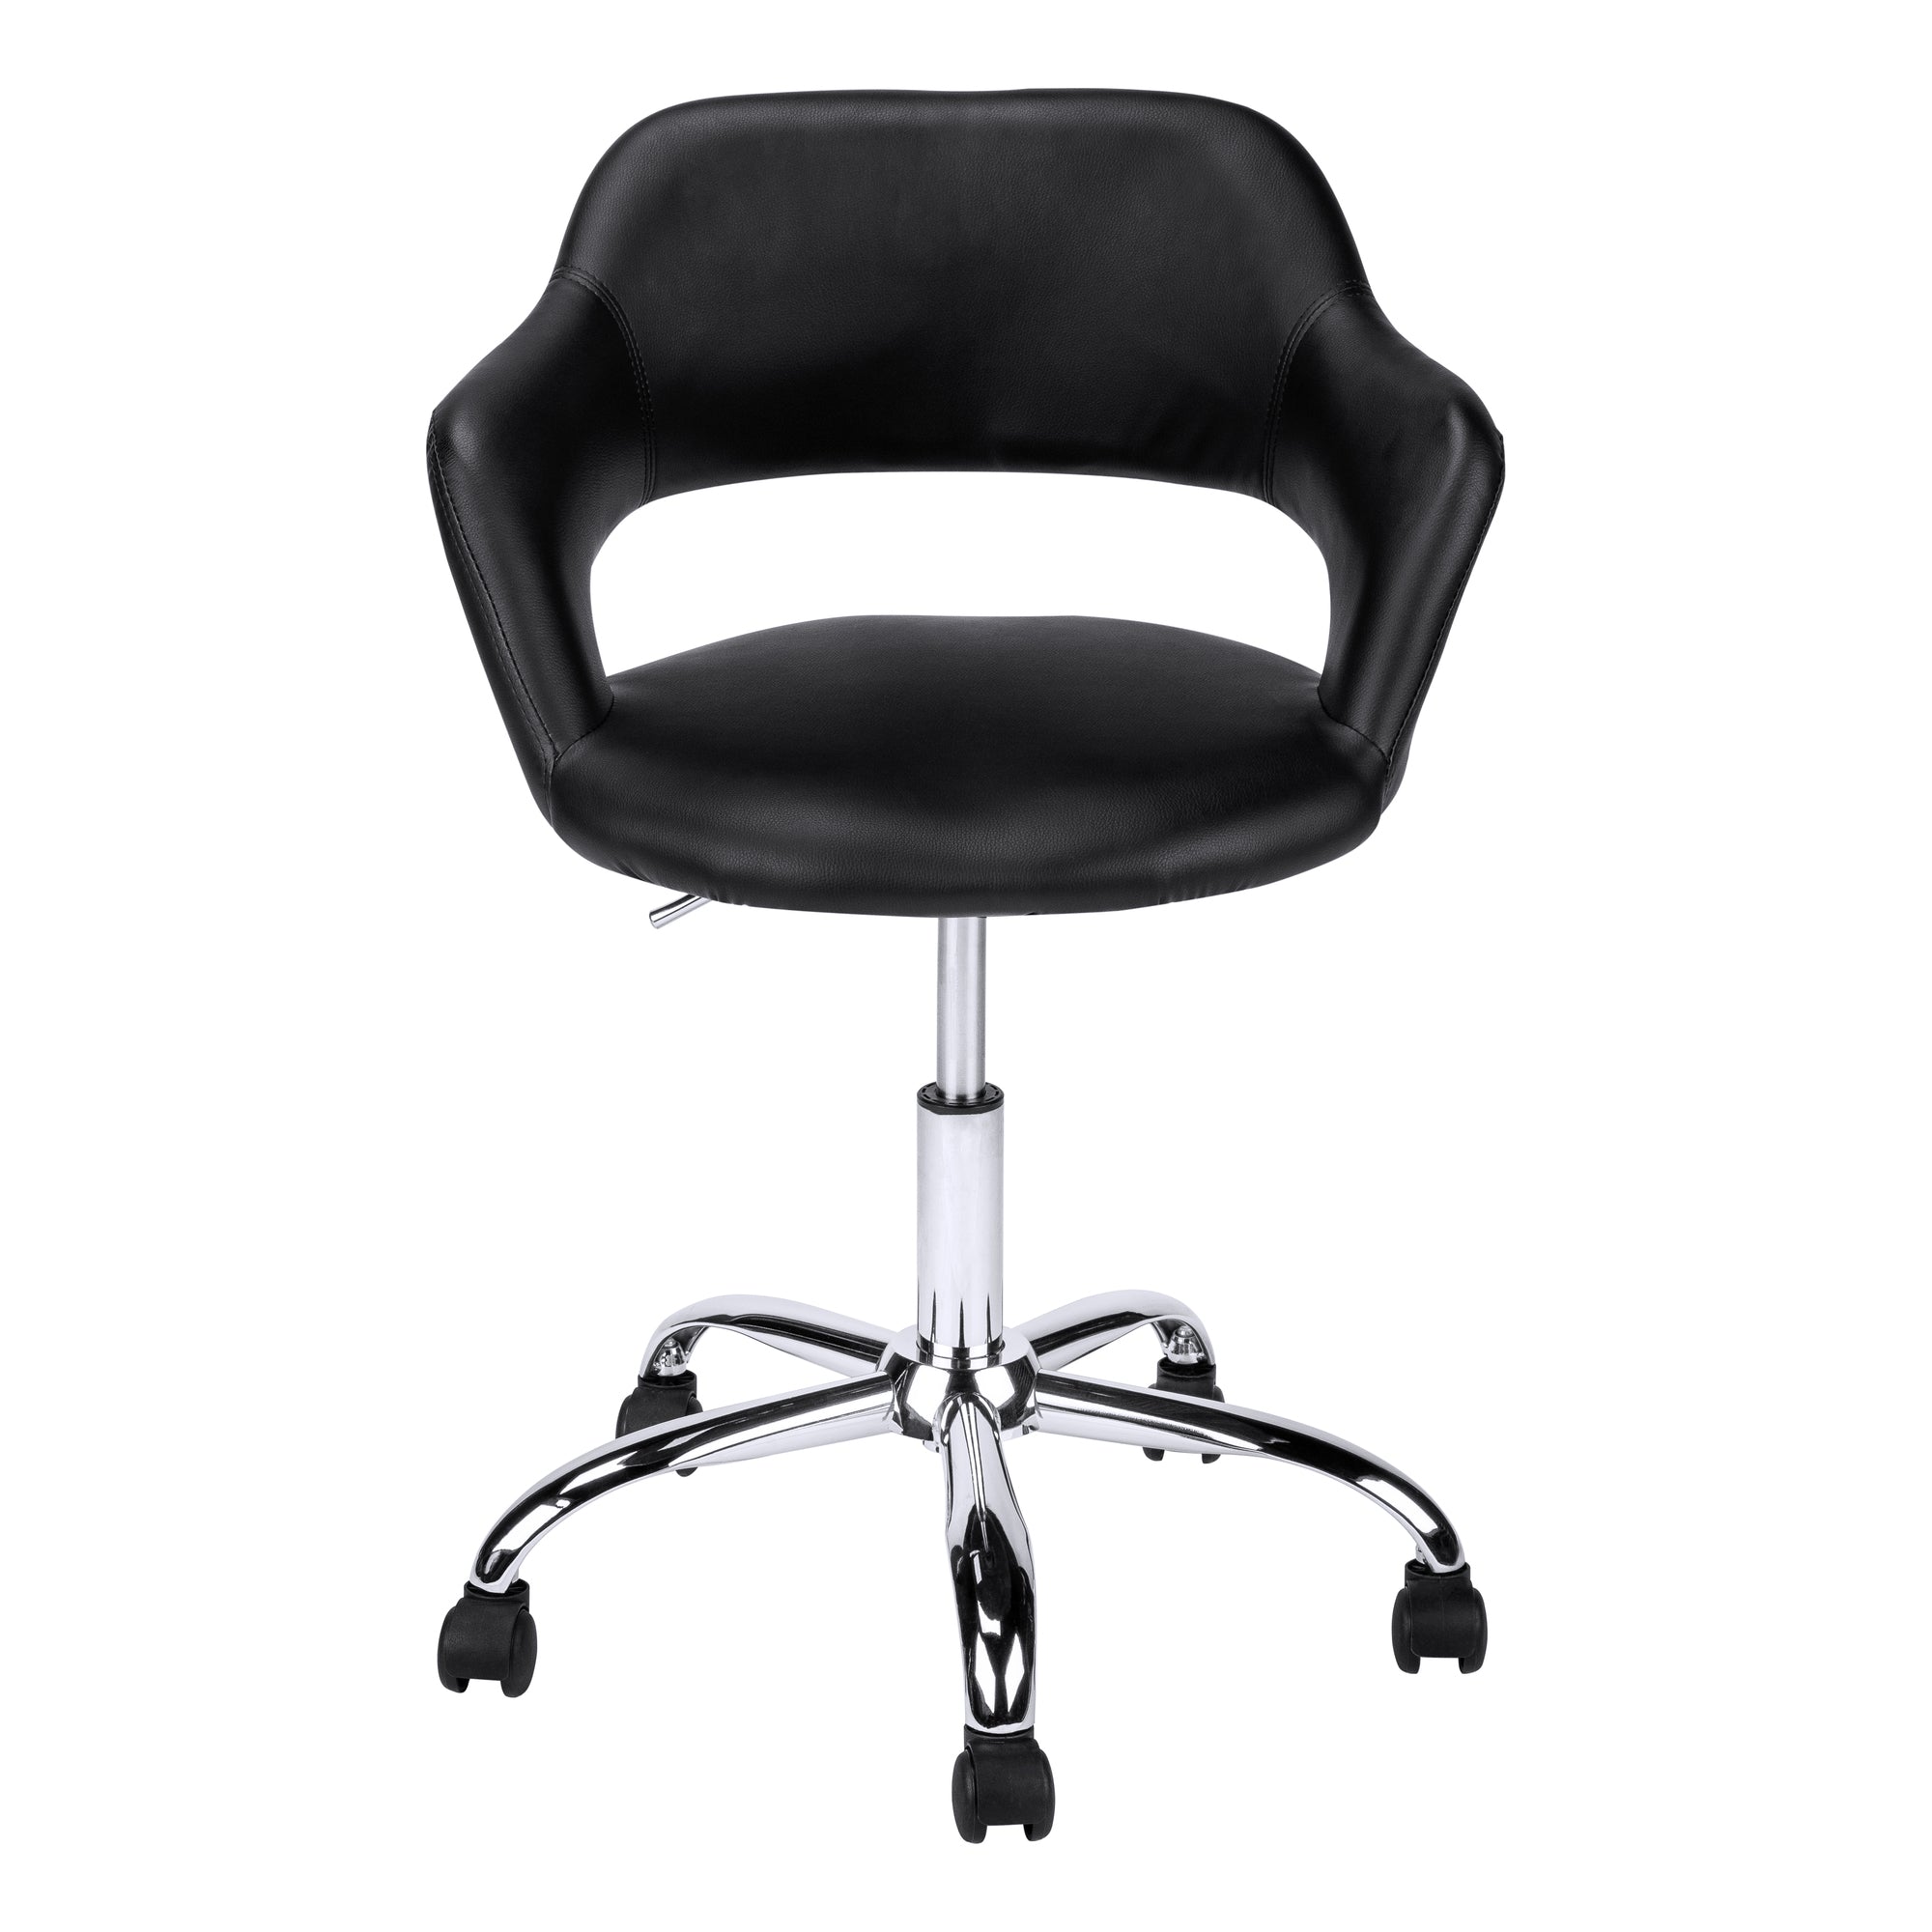 Black-Faux-Leather-Seat-Swivel-Adjustable-Task-Chair-Leather-Back-Office-Chairs